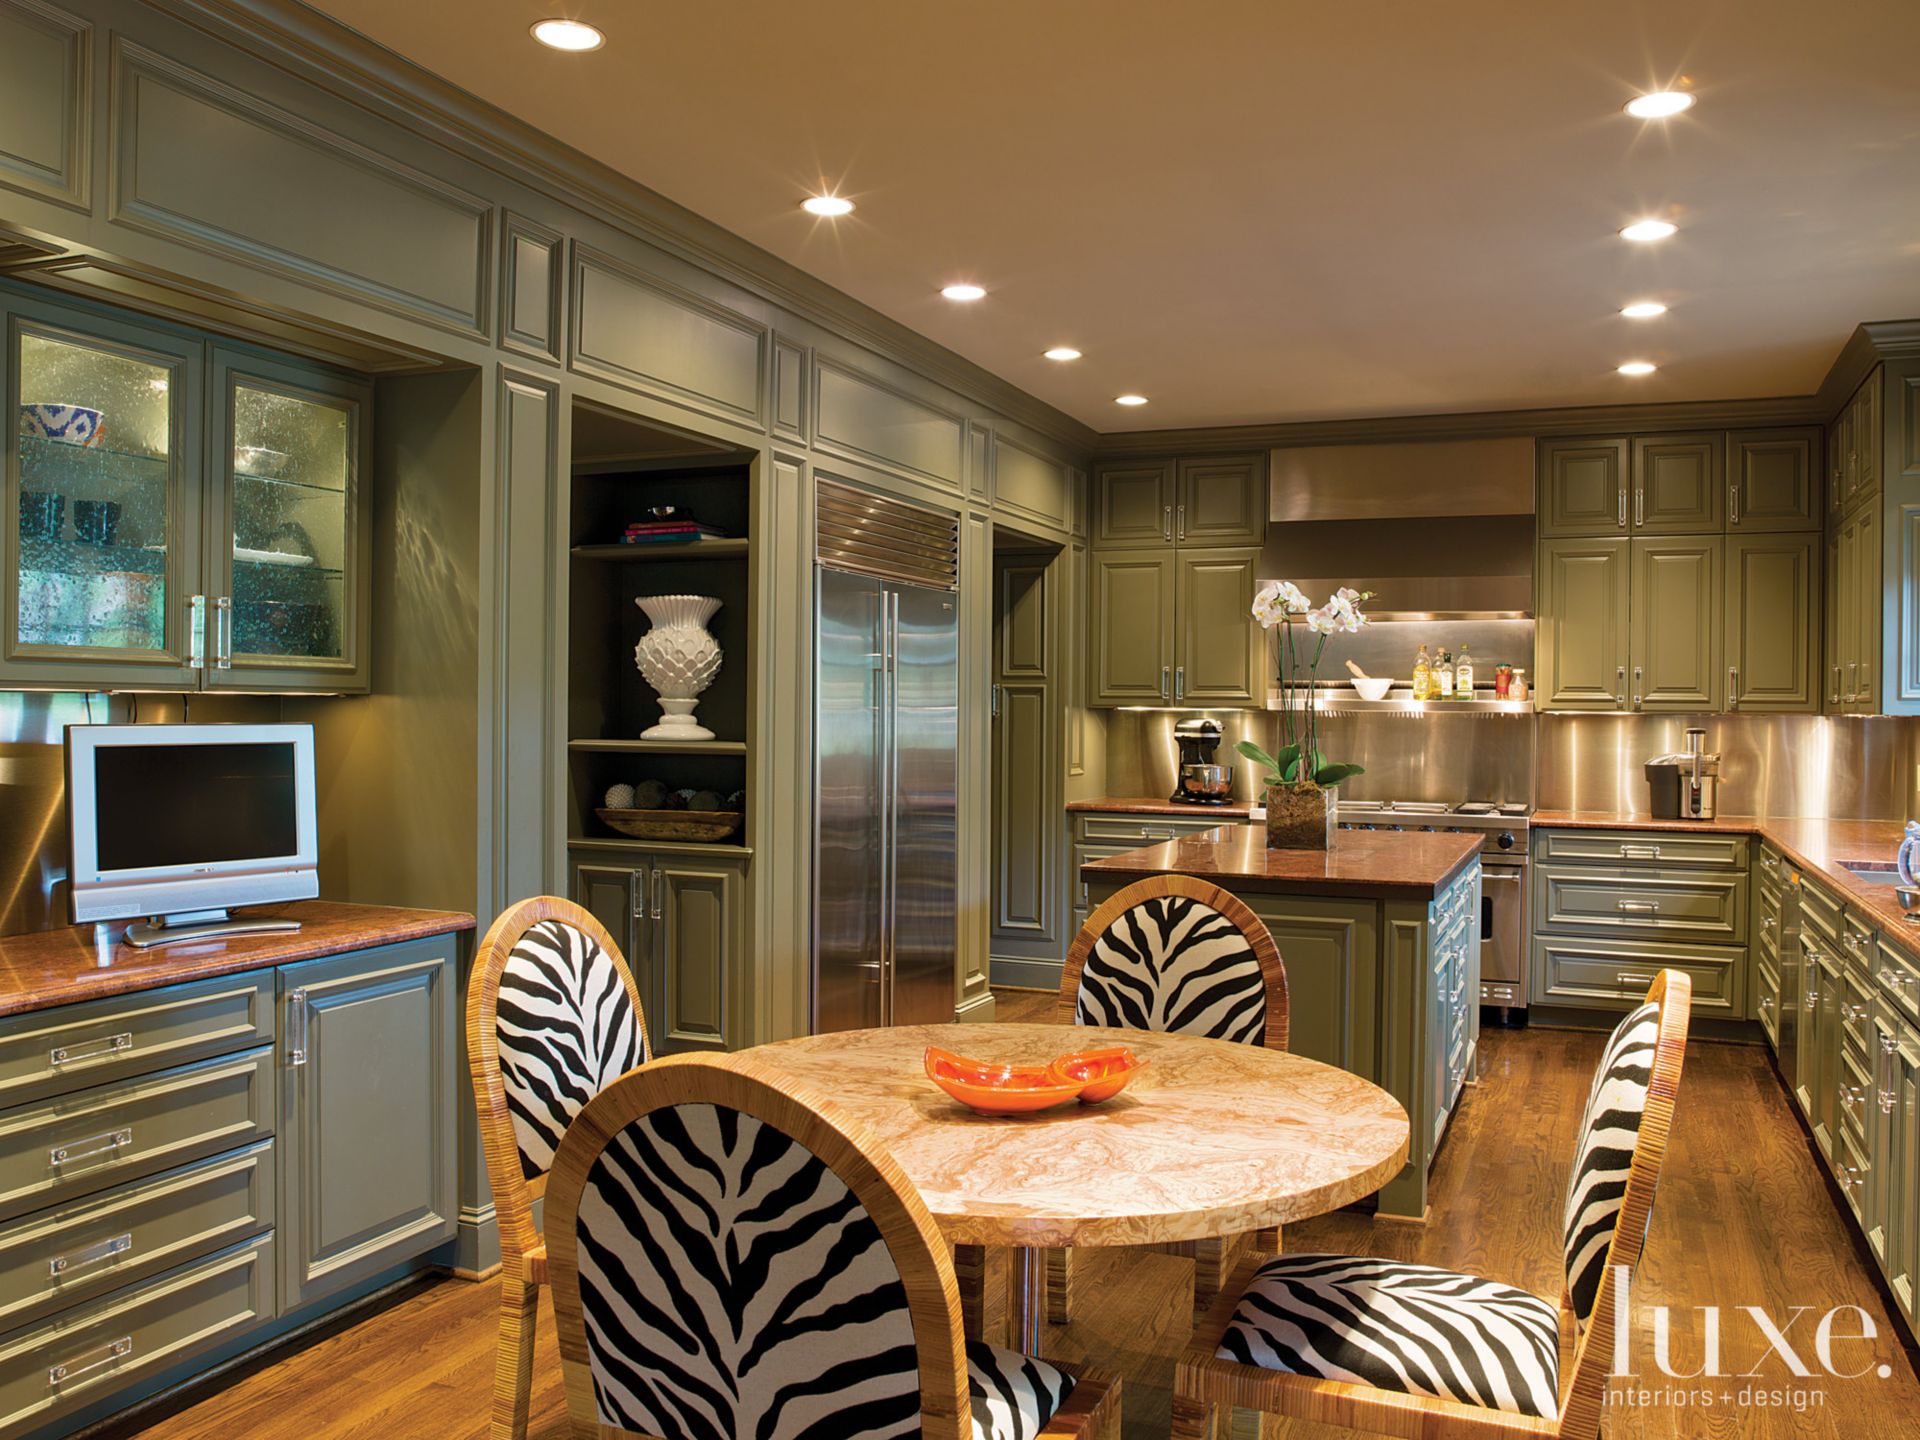 kitchen with green cabinets, wooden dining table and zebra patterned chairs